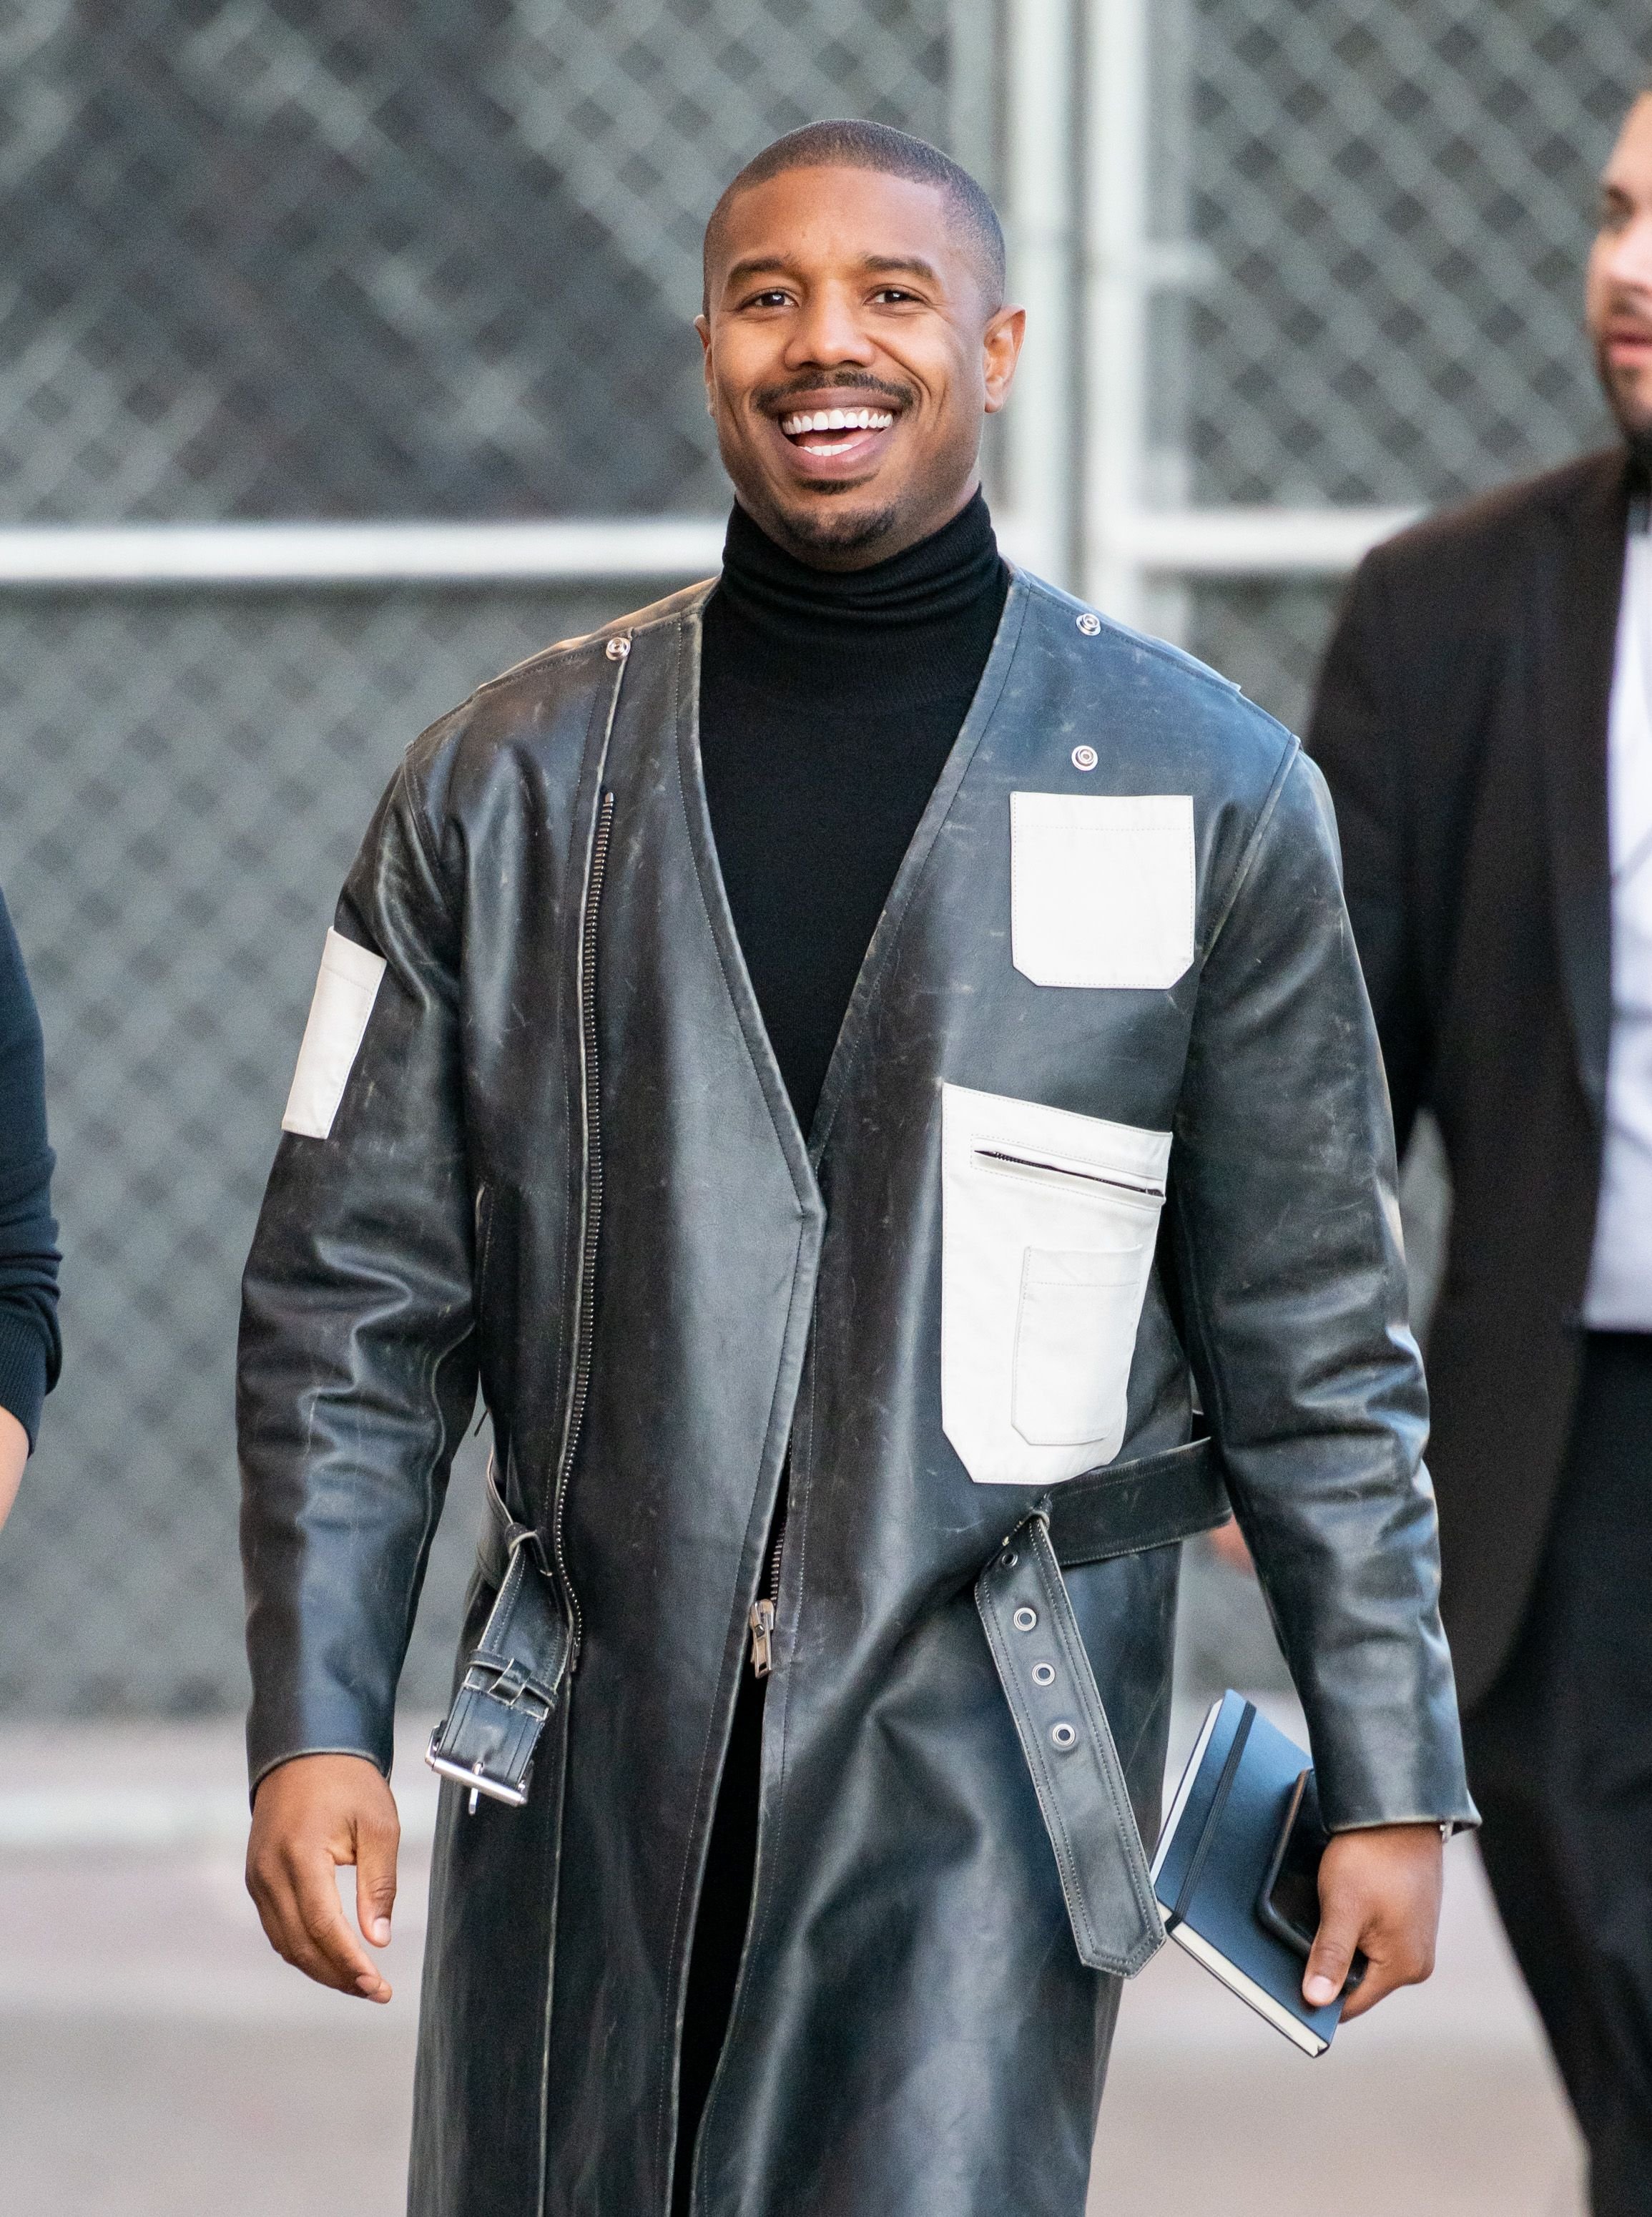 Actor Michael B. Jordan at 'Jimmy Kimmel Live' on January 09, 2020 in Los Angeles. | Photo: Getty Images